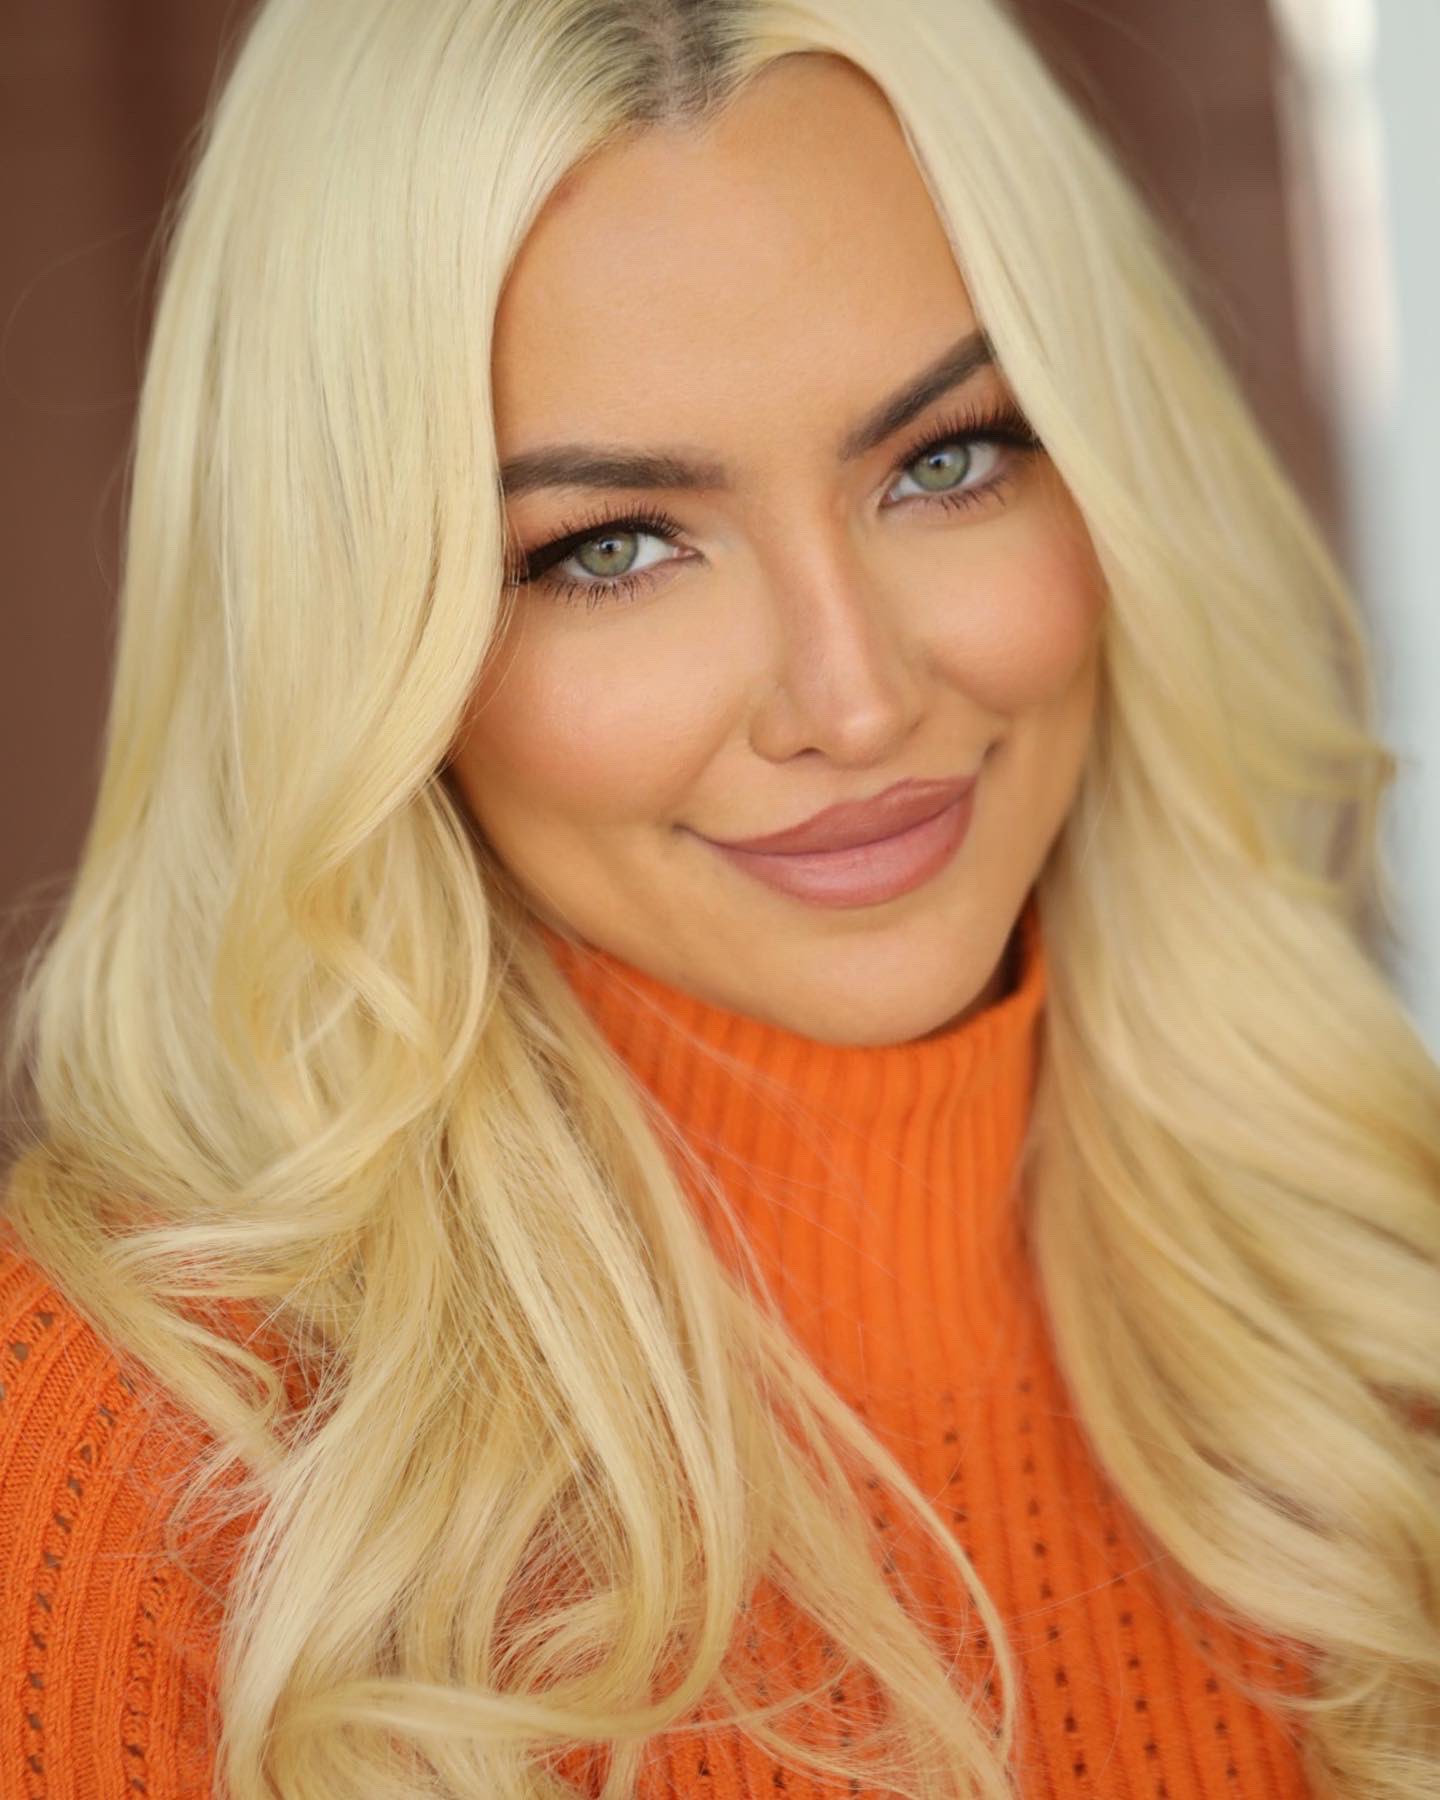 Tw Pornstars 2 Pic Lindsey Pelas Twitter Serious And Silly For Life 🤓 5 06 Pm 7 Feb 2022